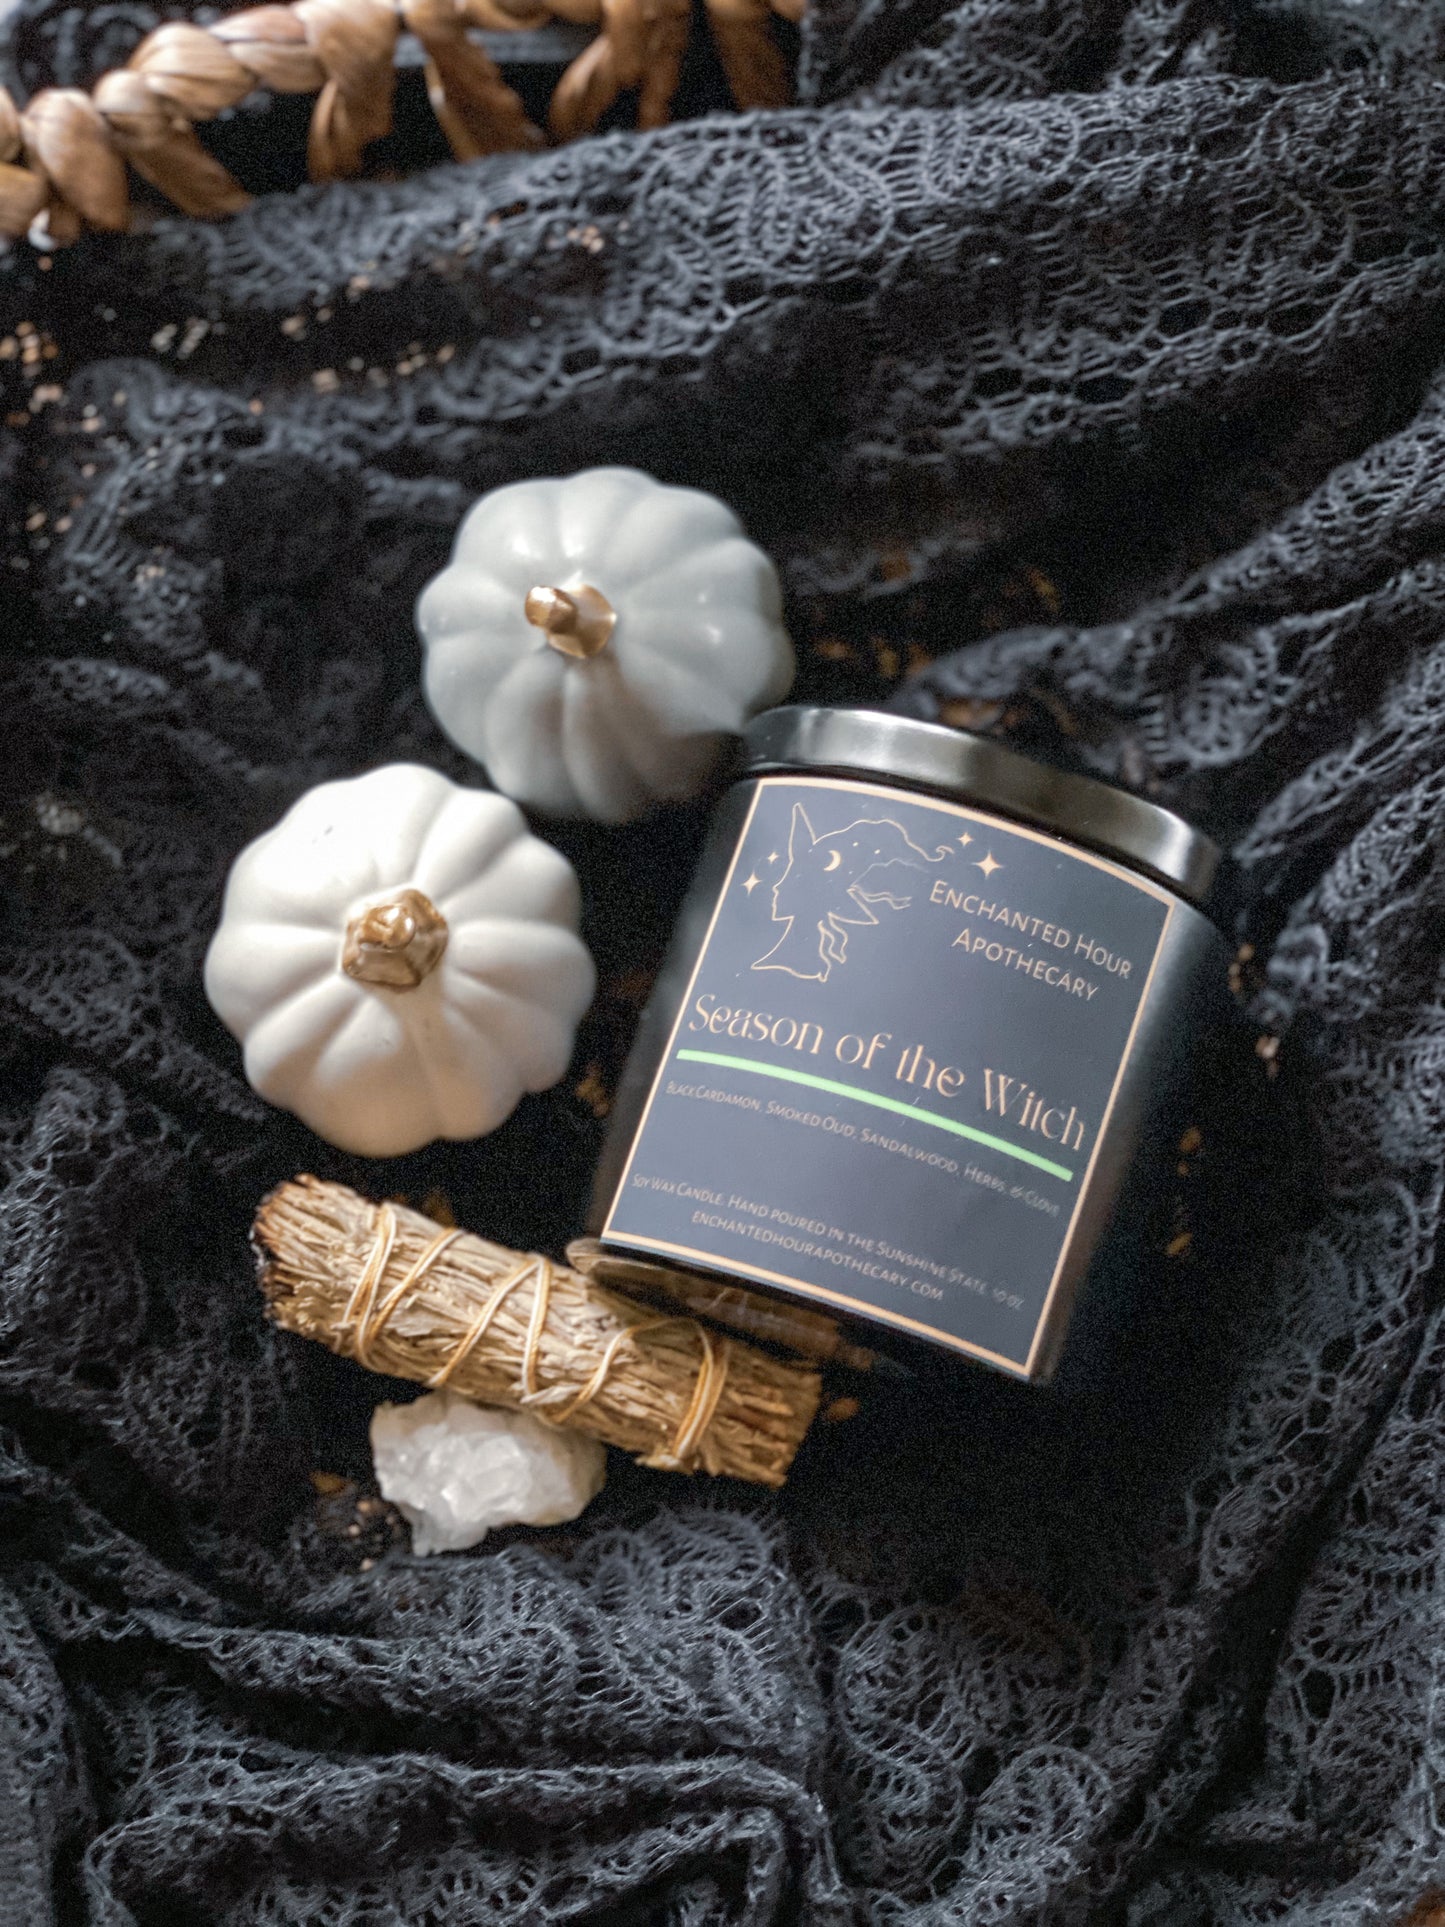 Season of the Witch soy candle